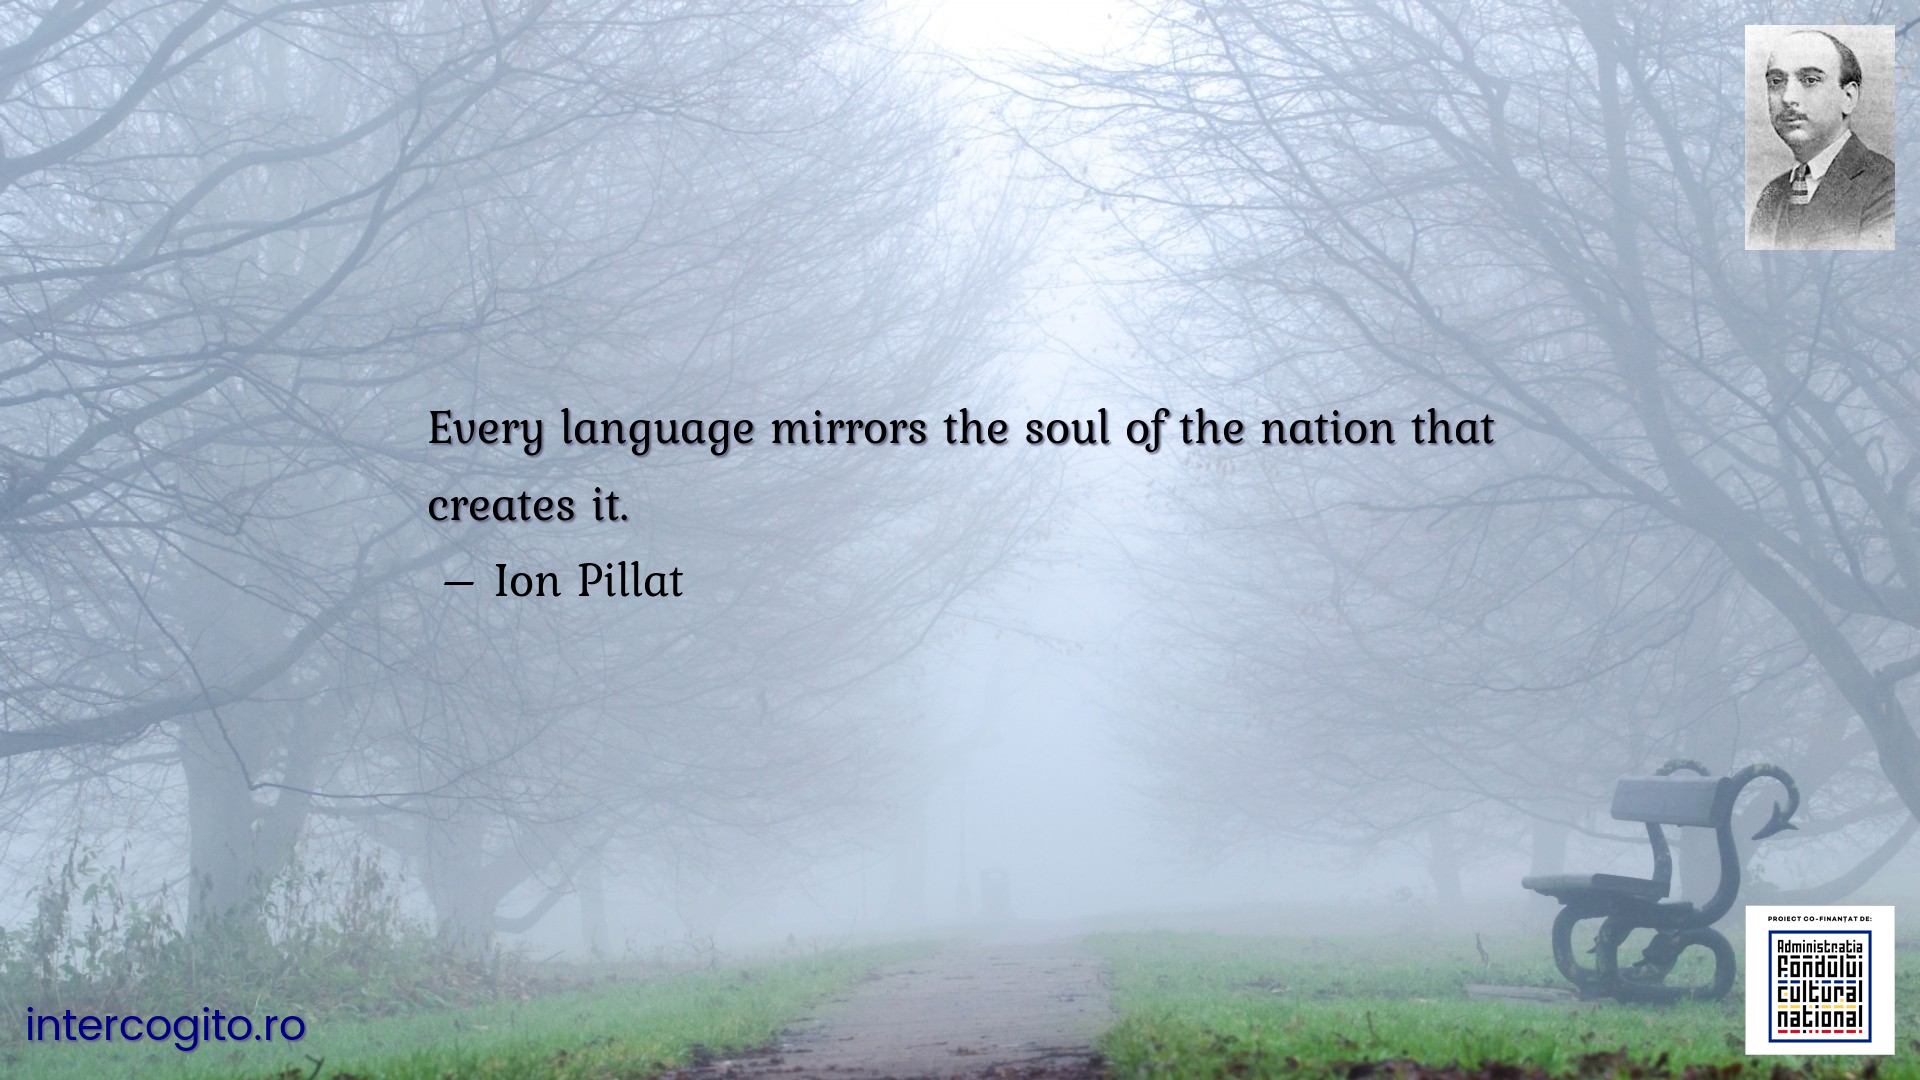 Every language mirrors the soul of the nation that creates it.